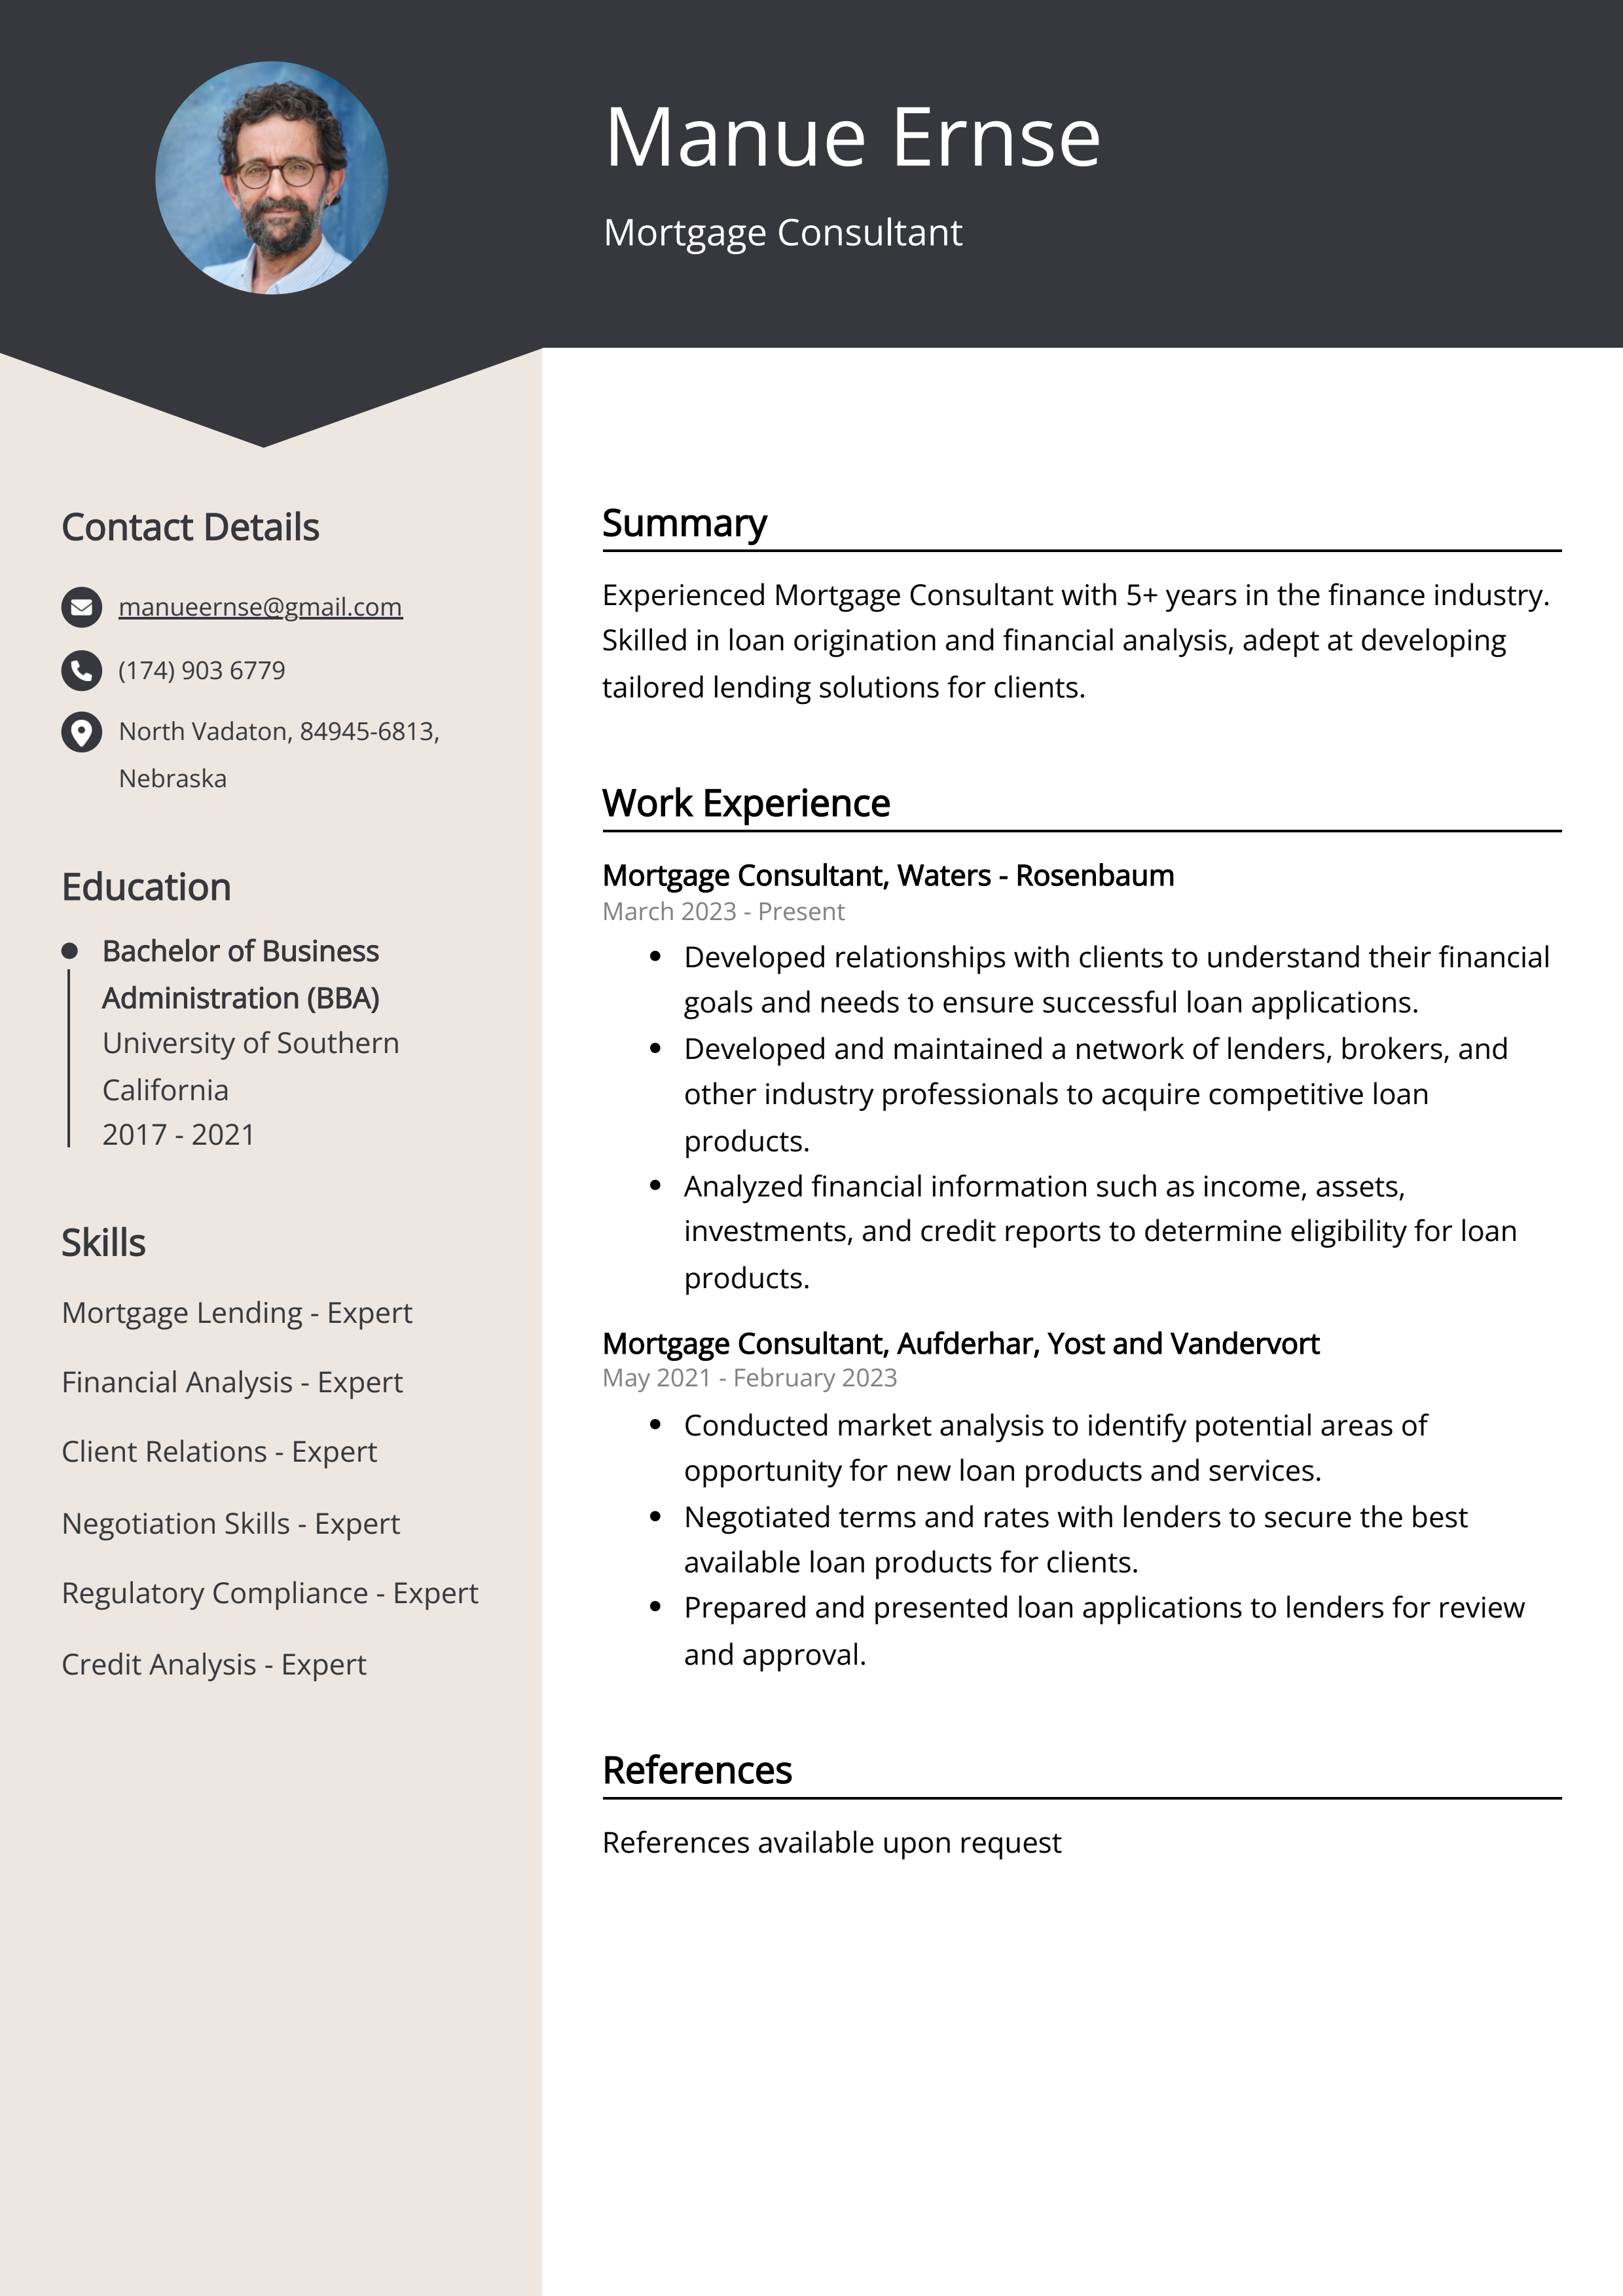 Mortgage Consultant CV Example